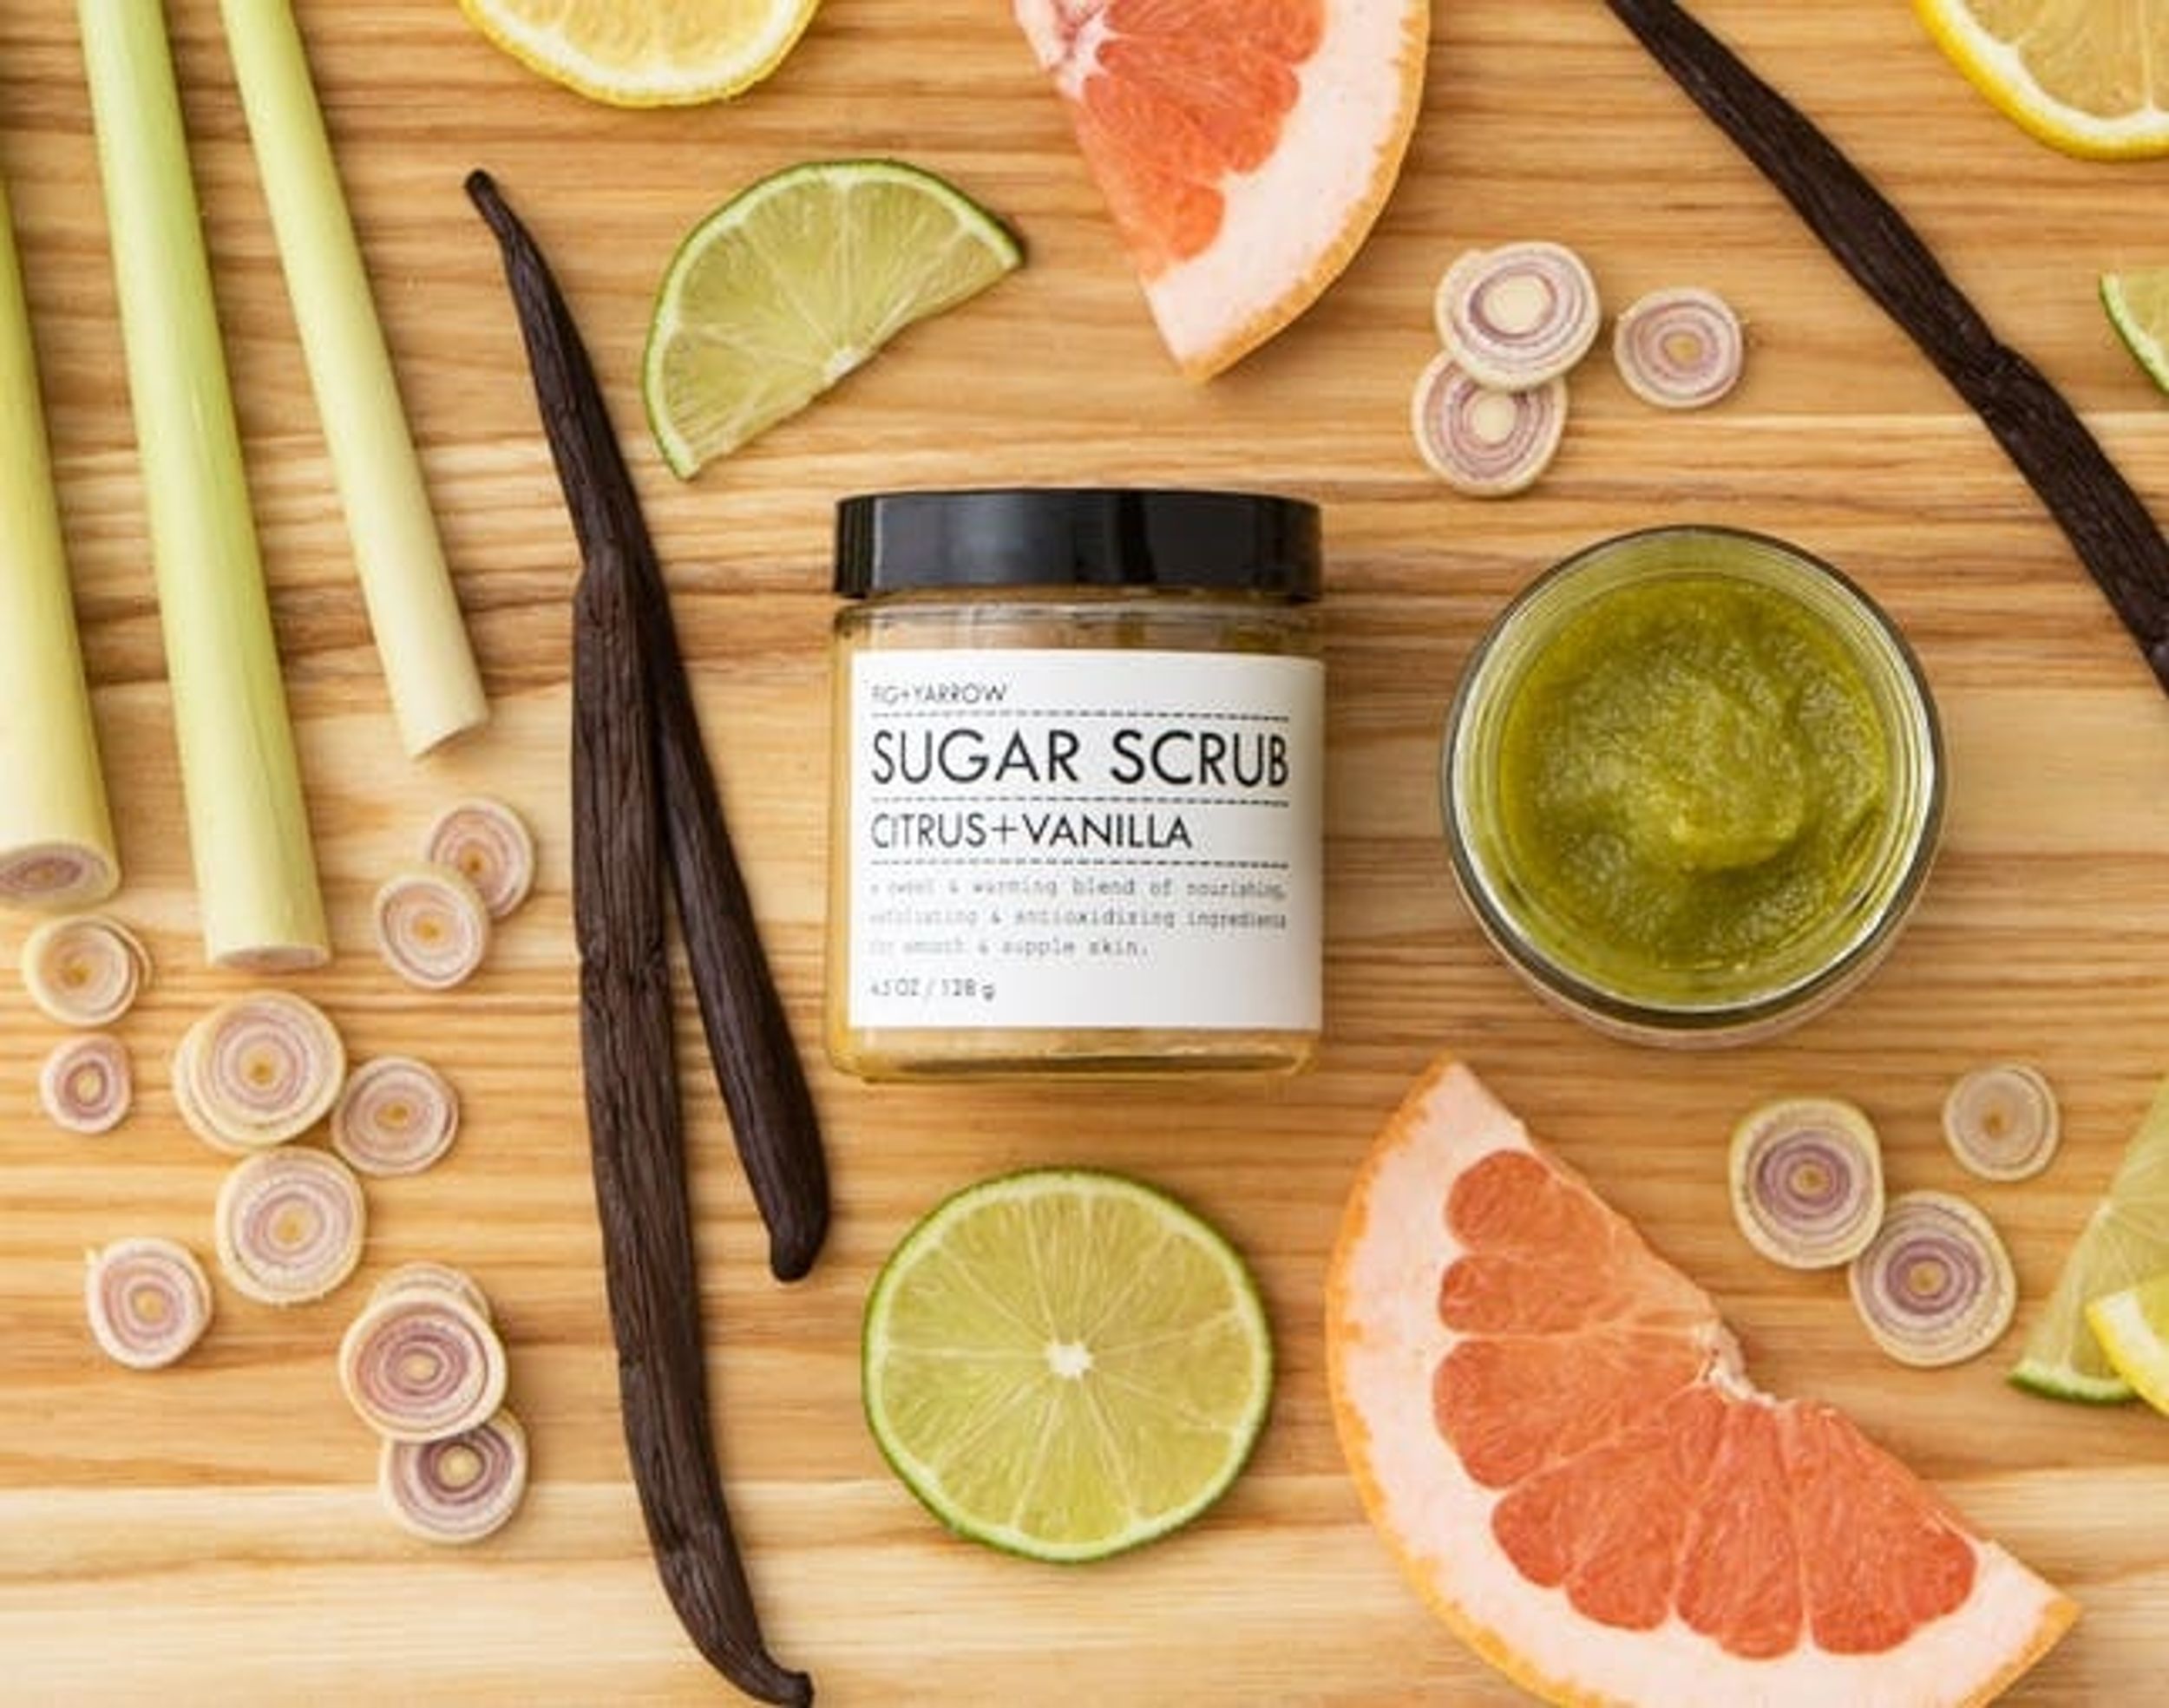 Stock Up on Fig+Yarrow Sugar Scrubs AND Learn to Make Your Own!